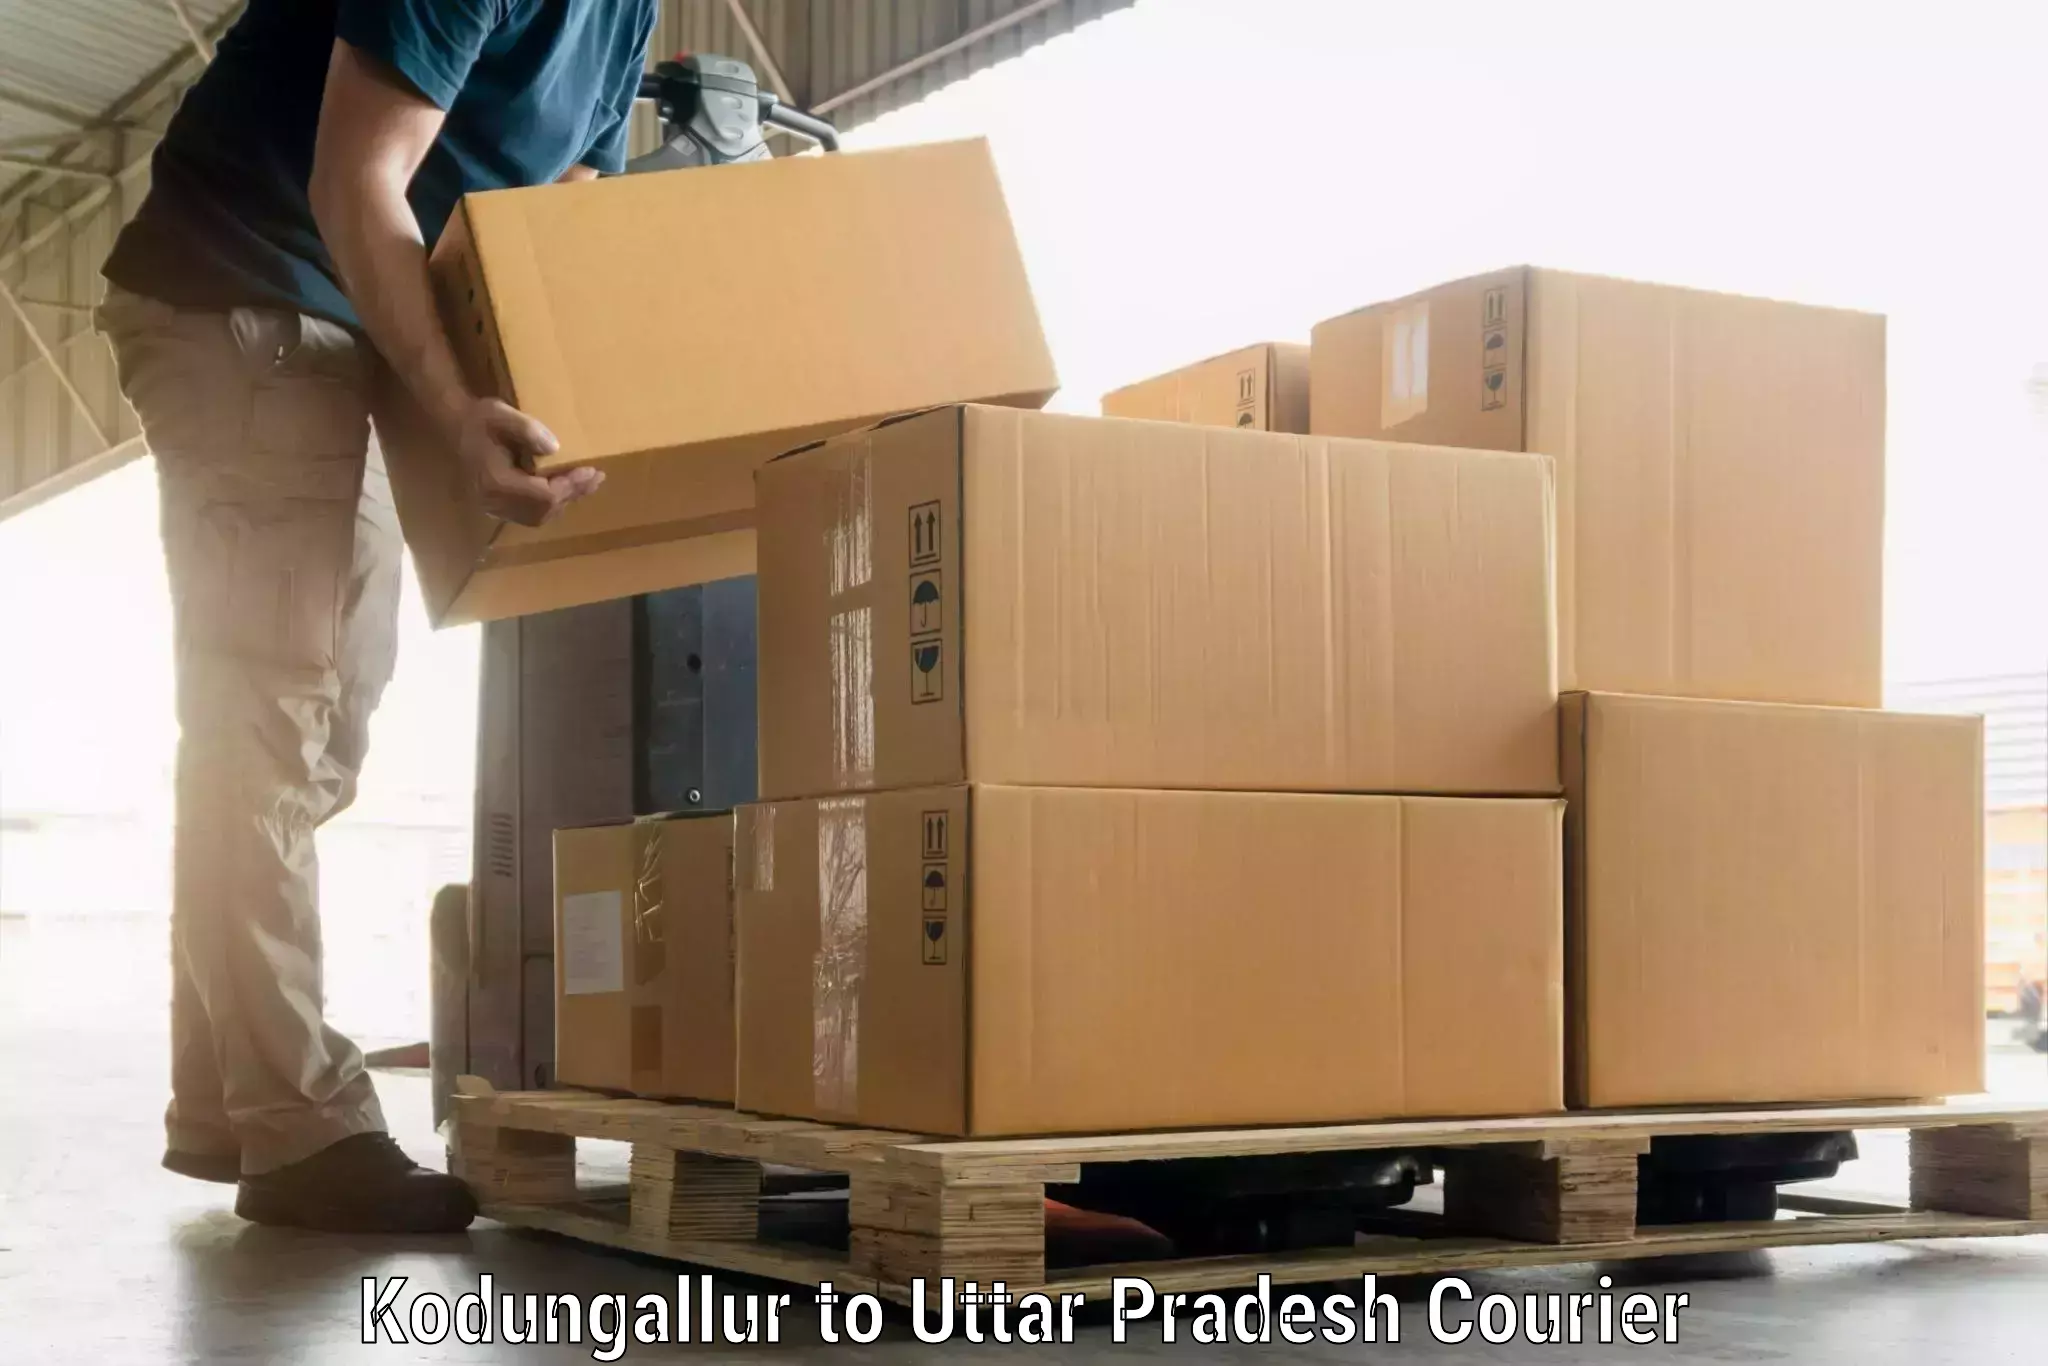 Online luggage shipping in Kodungallur to Amethi